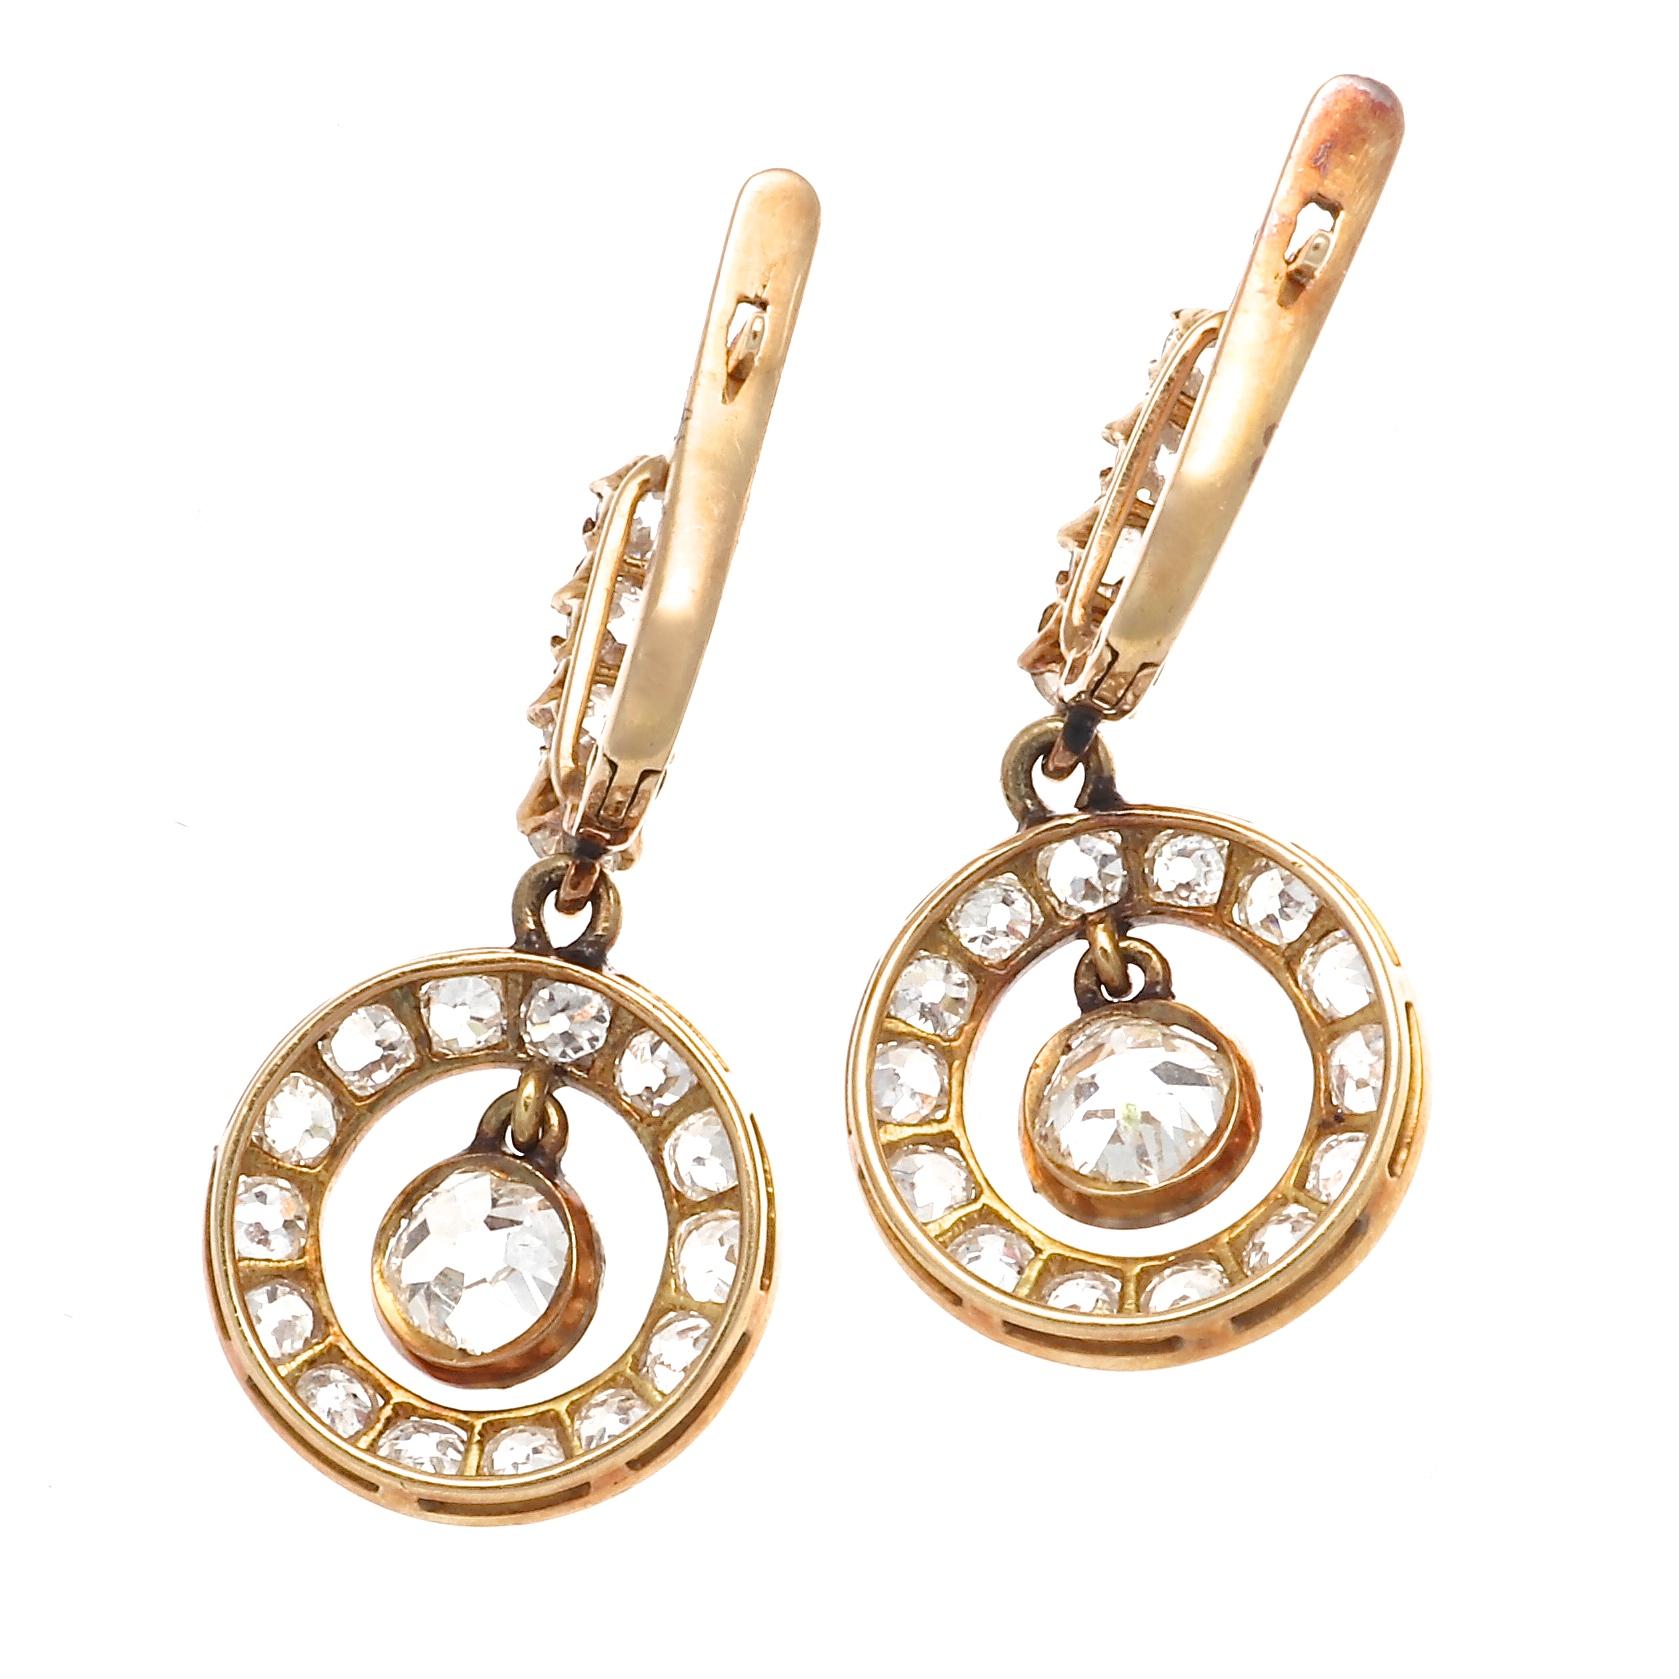 A classic combination of striking color and effortless design. Diamonds elegantly dangle into a drop of celestial design. Made for everyday comfort. Hand crafted in 18k yellow gold.